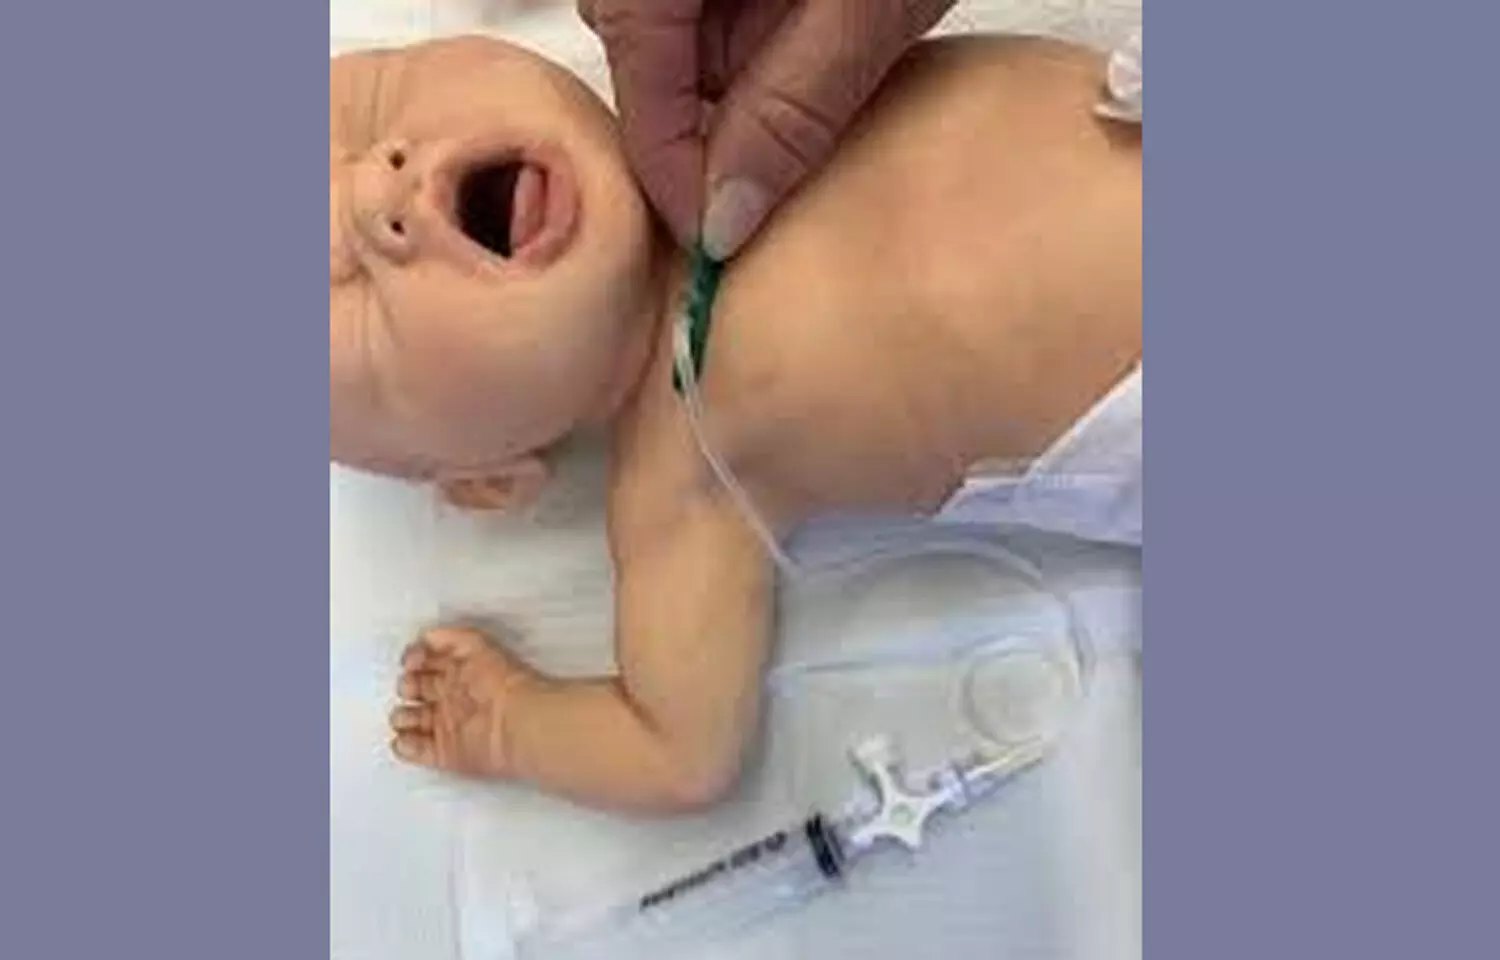 An early IV-to-oral antibiotic switch equivalent to Full IV course in Neonates: LANCET